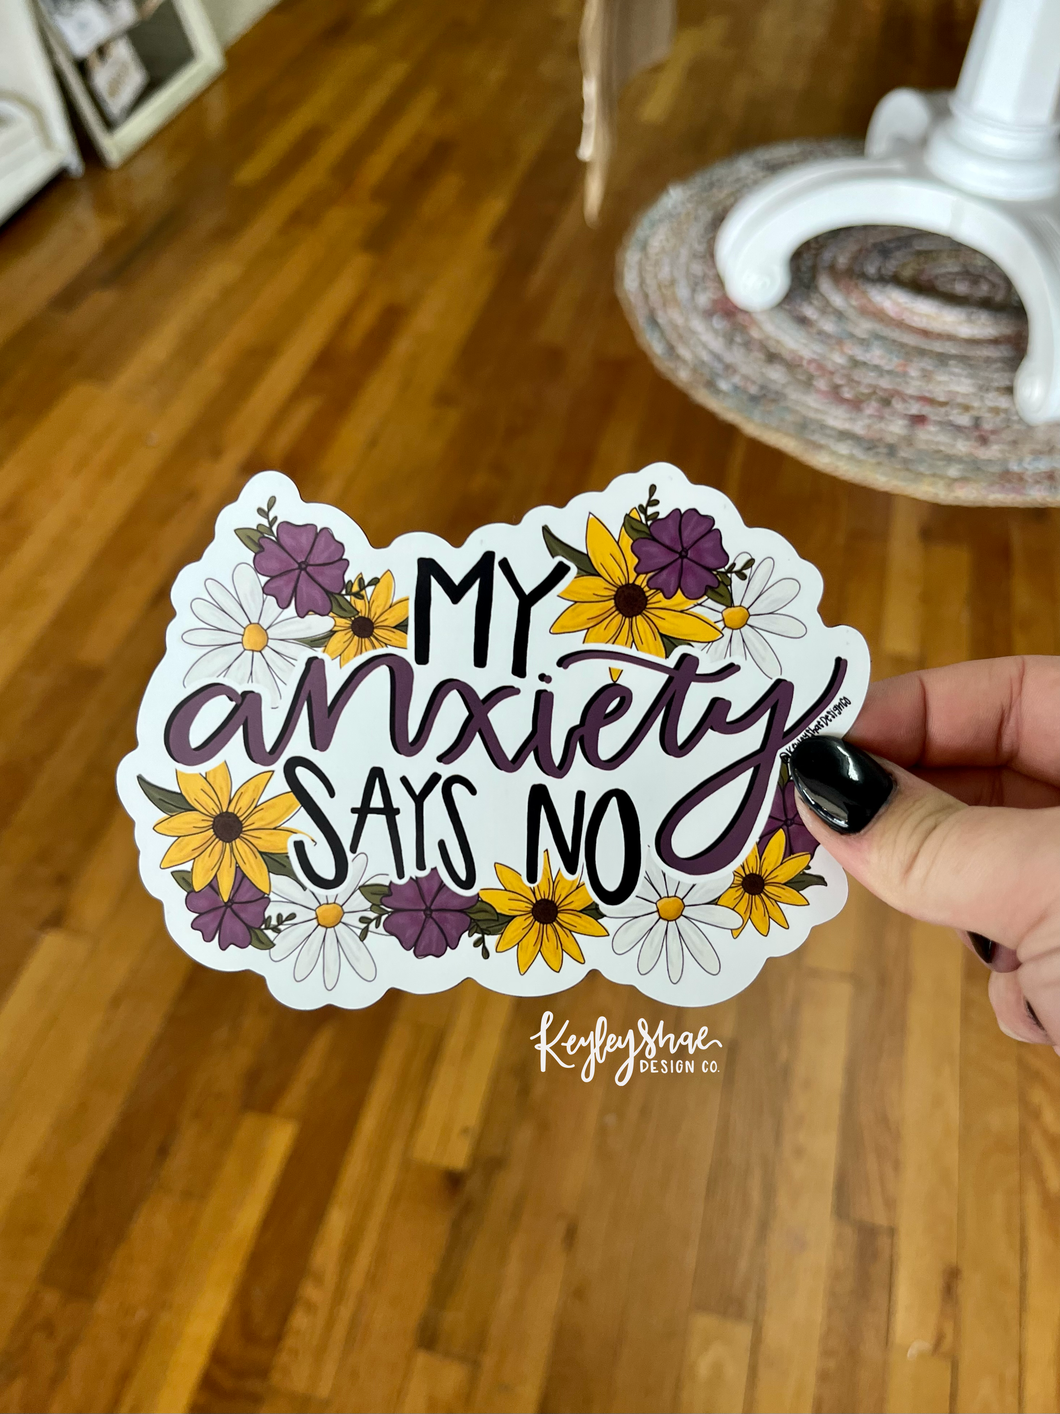 My Anxiety Says No Magnet